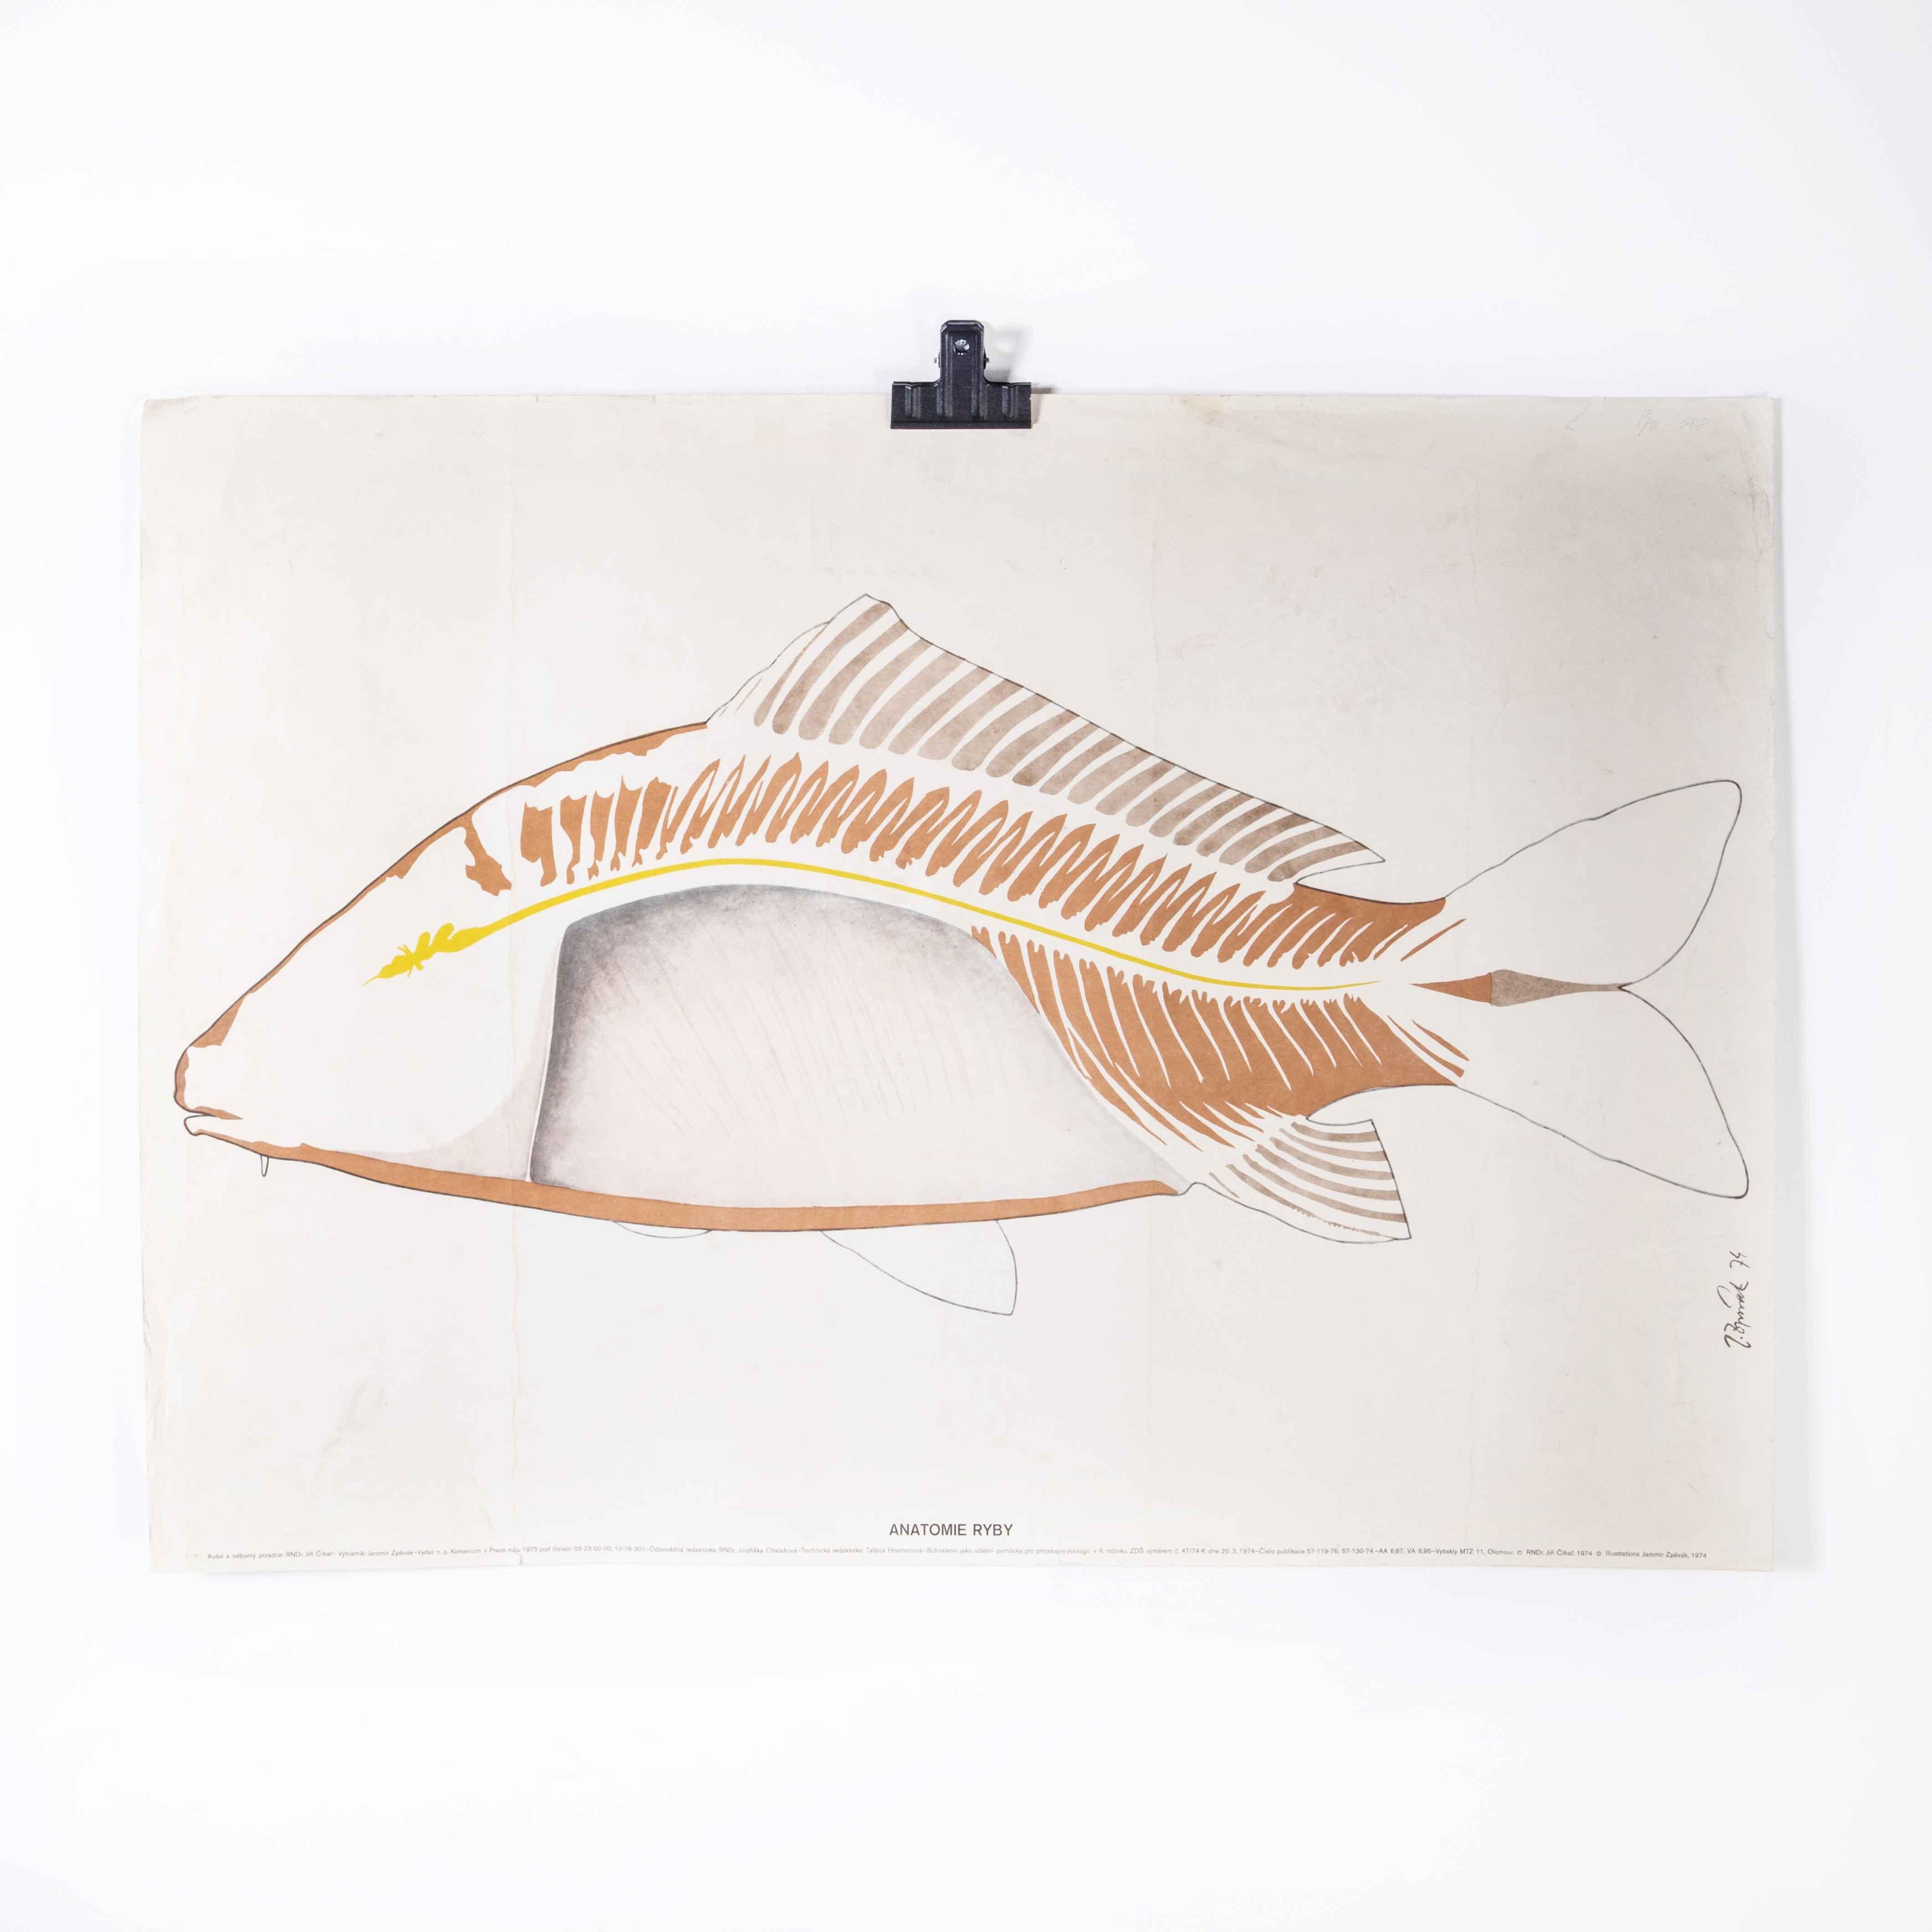 1970’s Fish Outline Educational Poster
1970’s Fish Outline Educational Poster. Early 20th century Czechoslovakian educational chart. A rare and vintage wall chart from the Czech Republic illustrating the outline of a fish and its bones. This